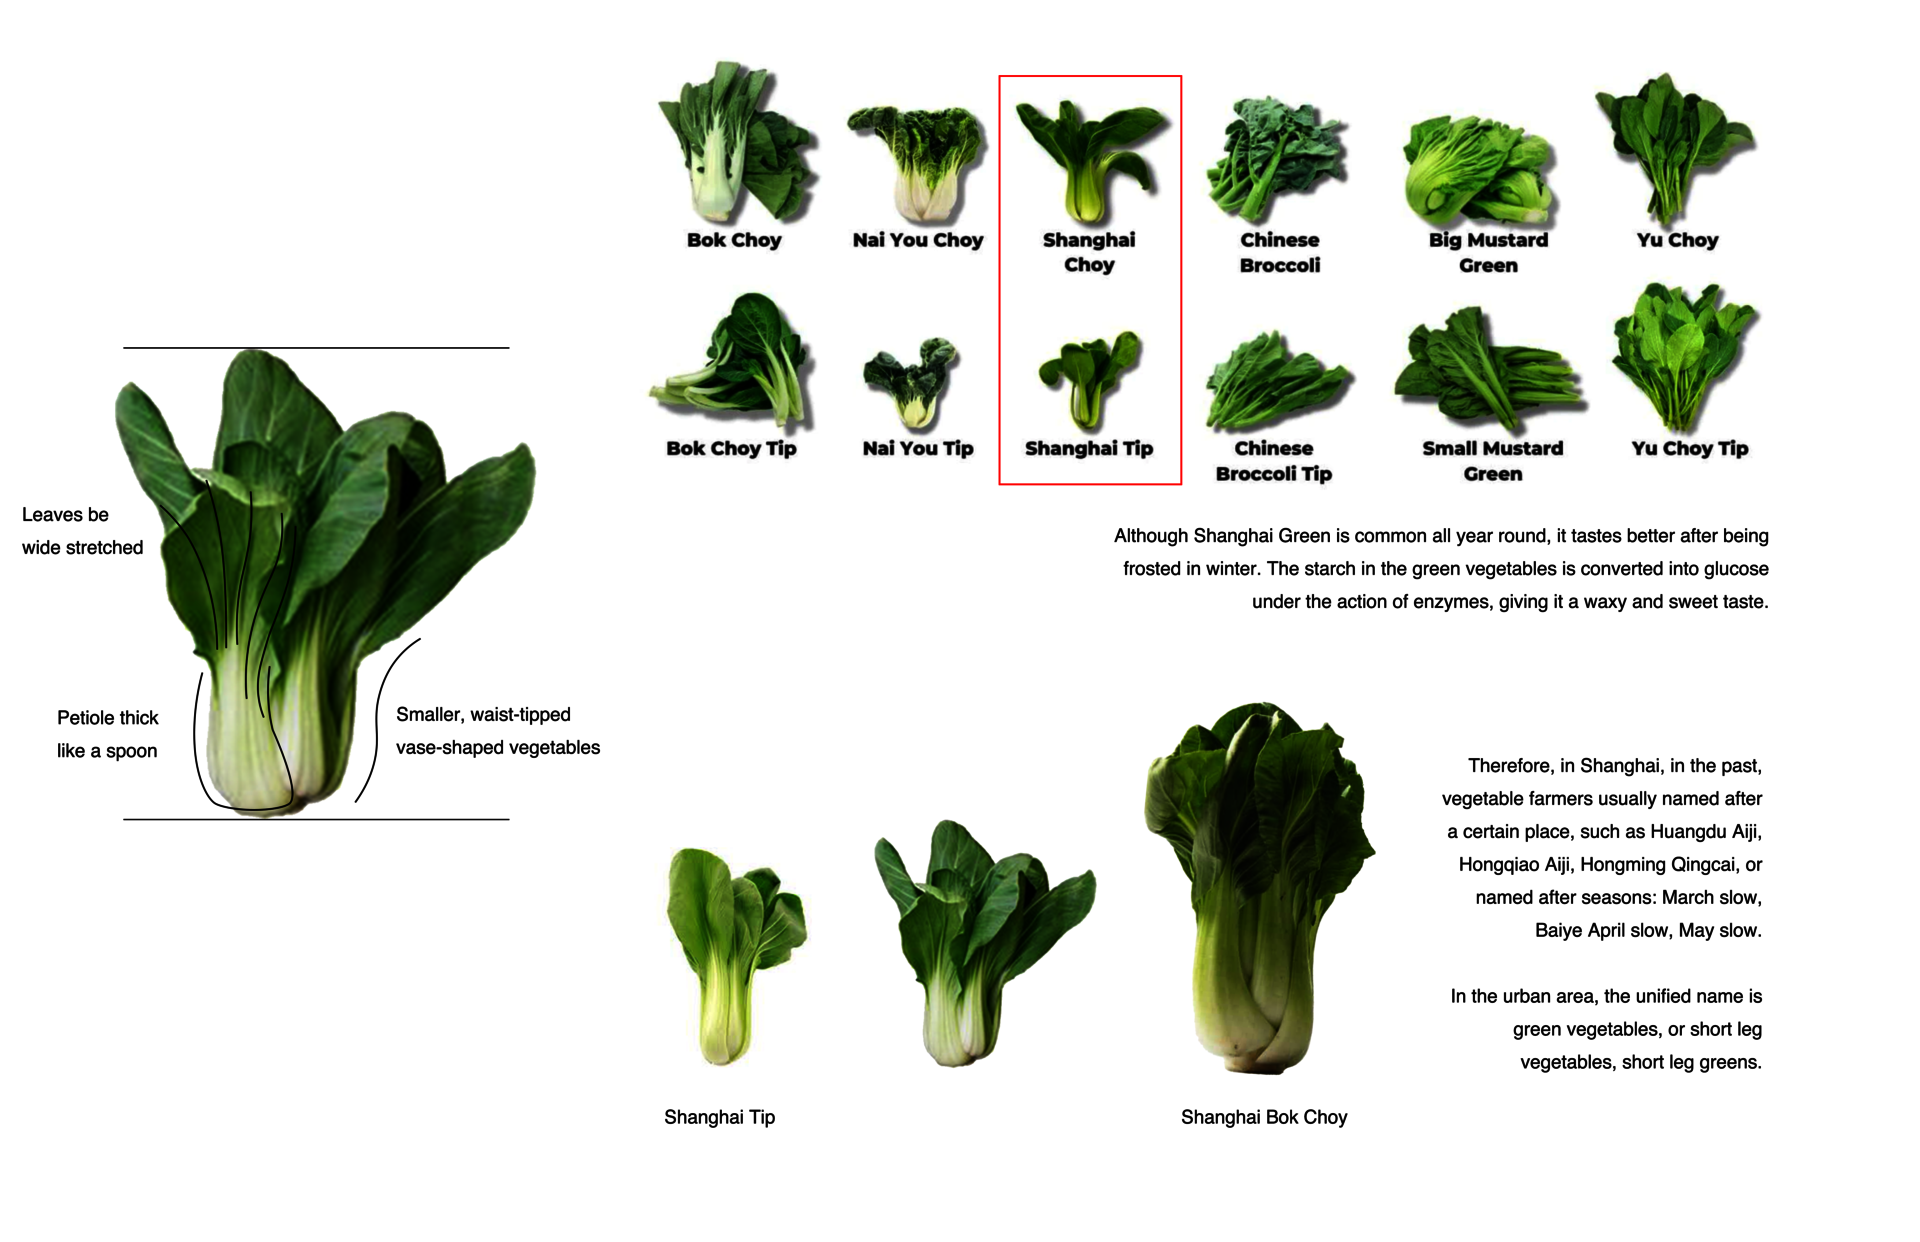 Our perception of vegetables has been changed by so-called organic companies, and the change in Shanghai Bok Choy is particularly obvious.